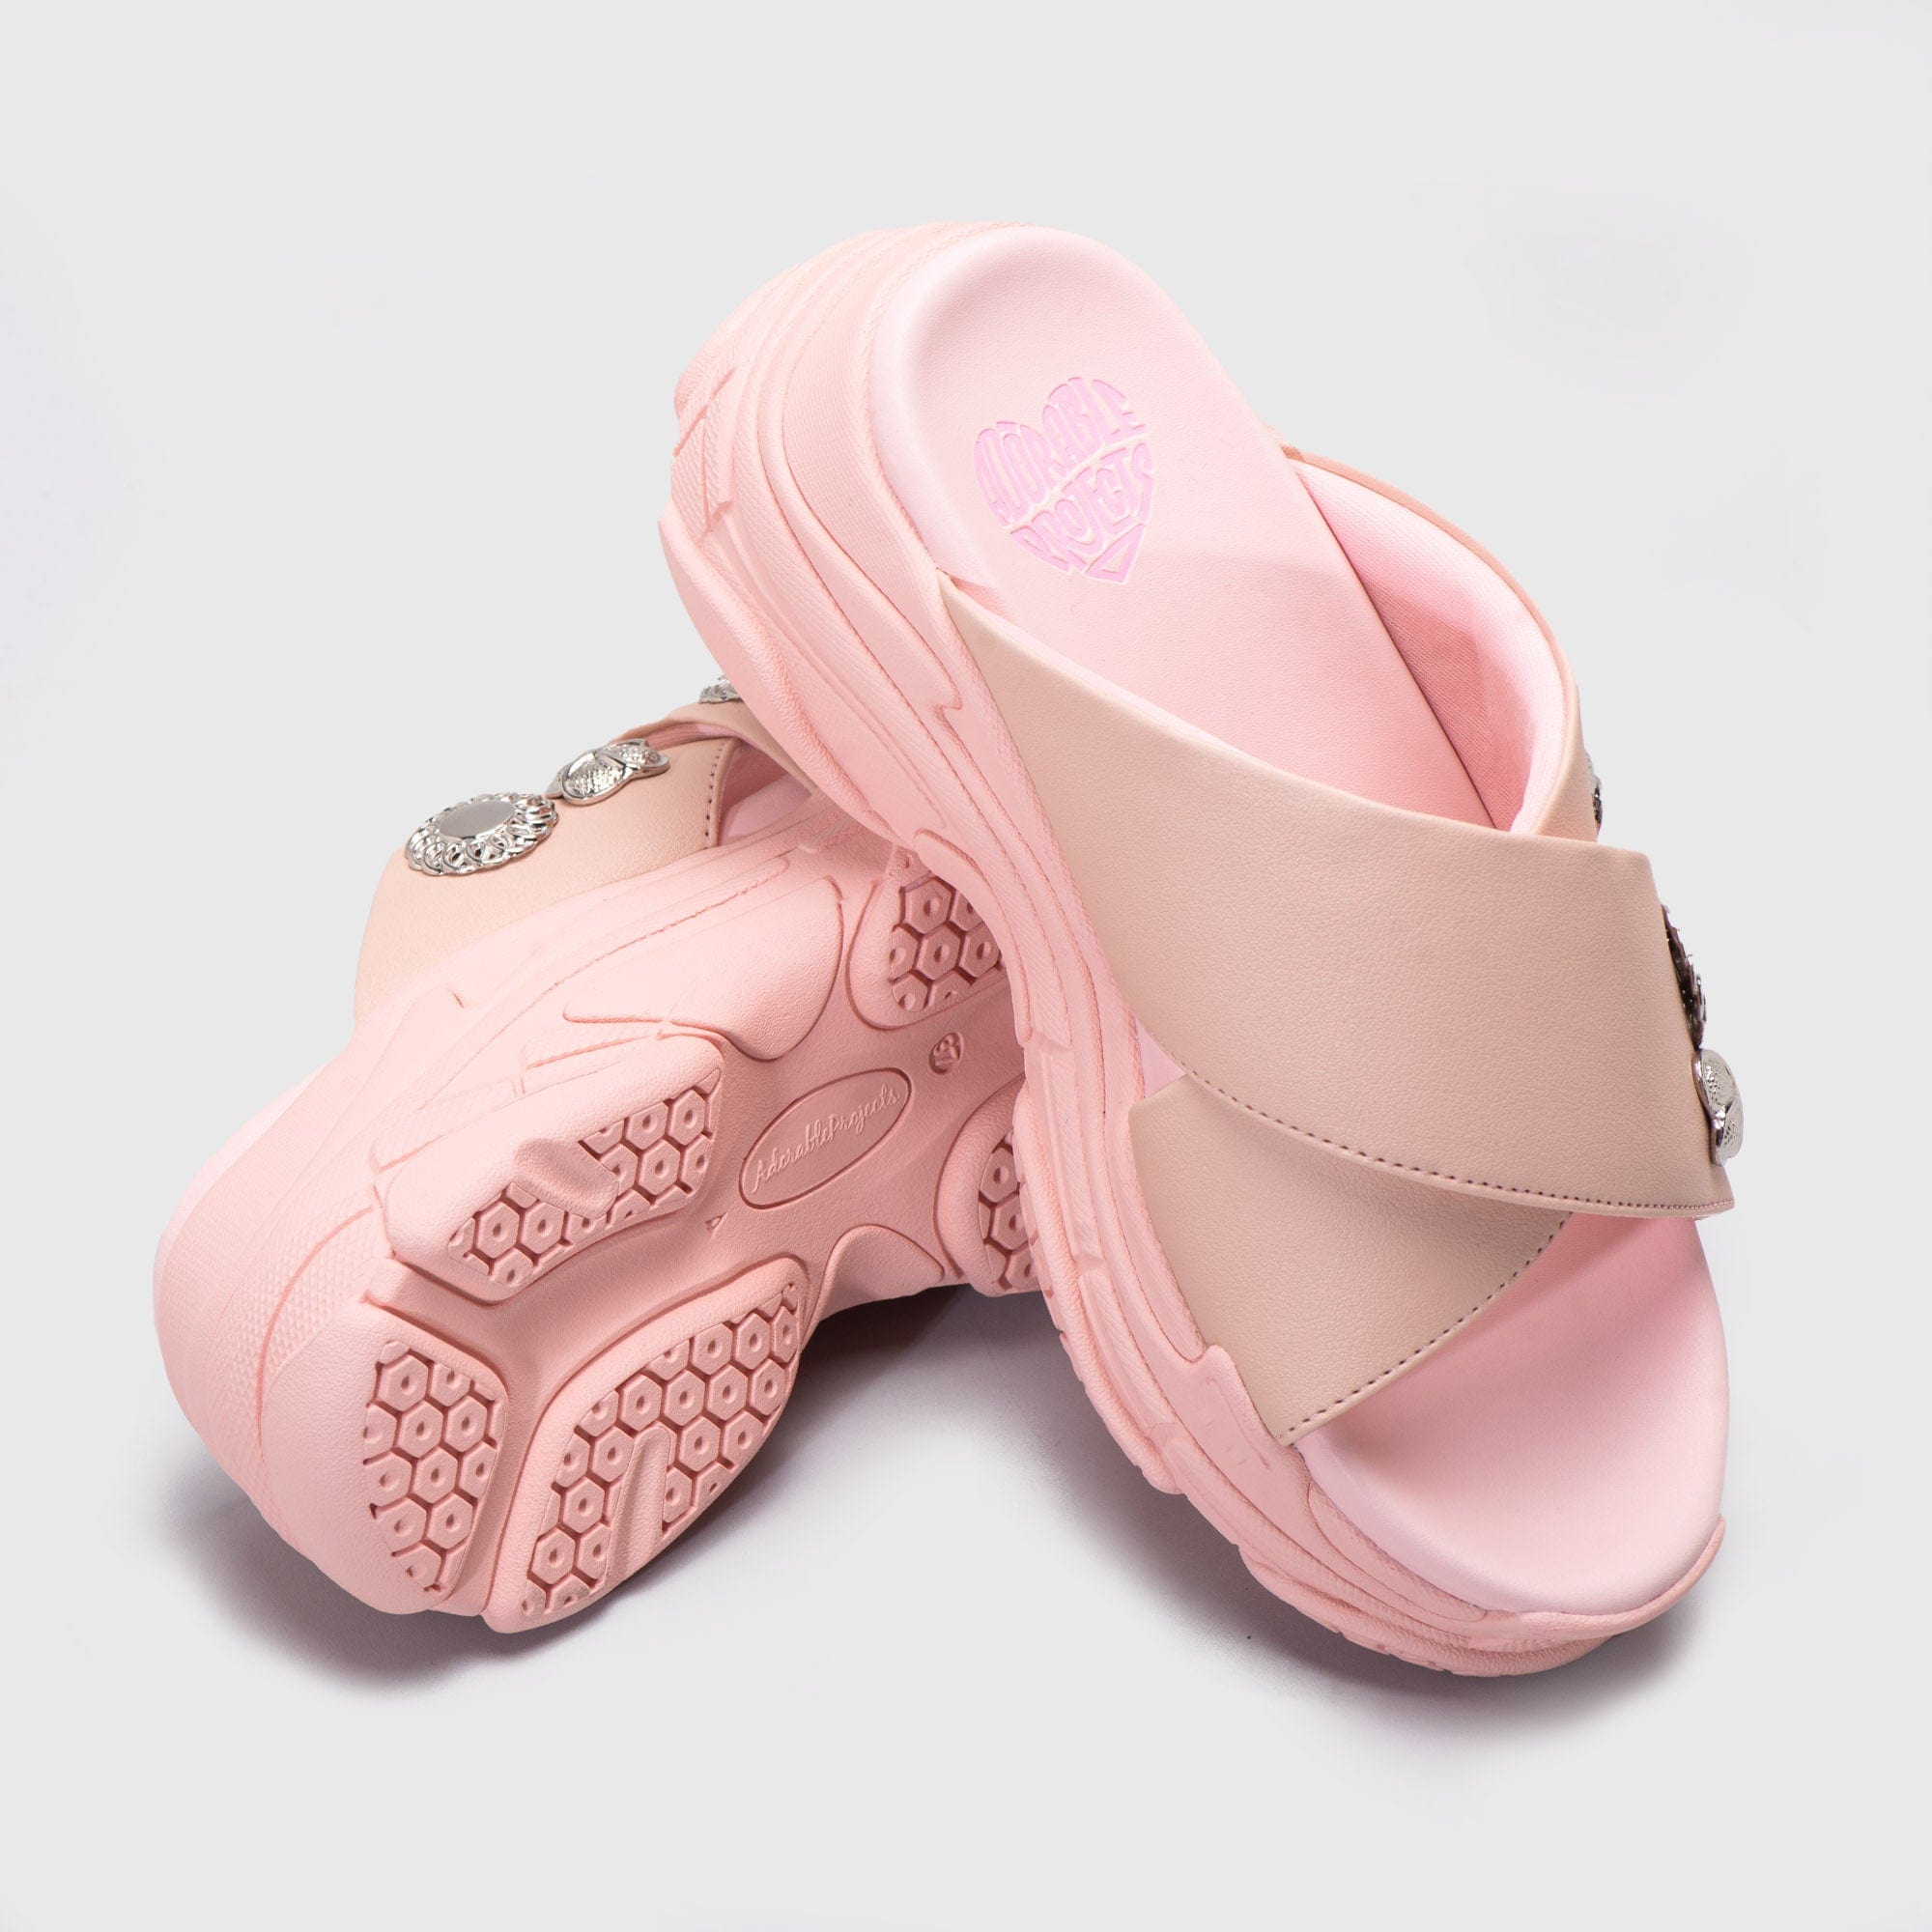 Adorable Projects Official Adorableprojects - Turati Sandals Pink - Sendal Wanita